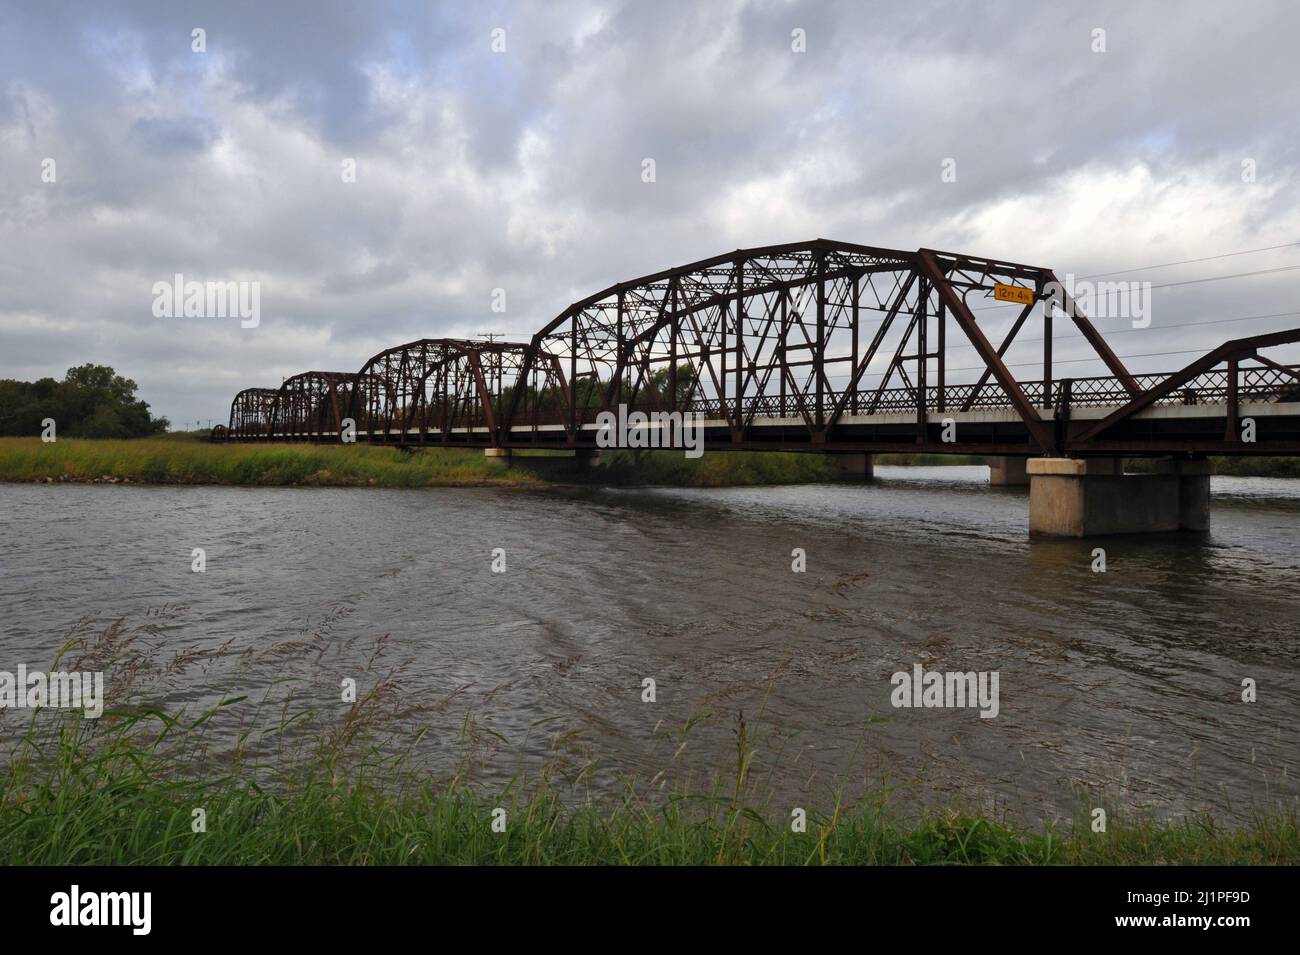 Opened in 1925, the landmark Lake Overholser Bridge near Oklahoma City carried Route 66 traffic until a wider segment was built in 1958. Stock Photo